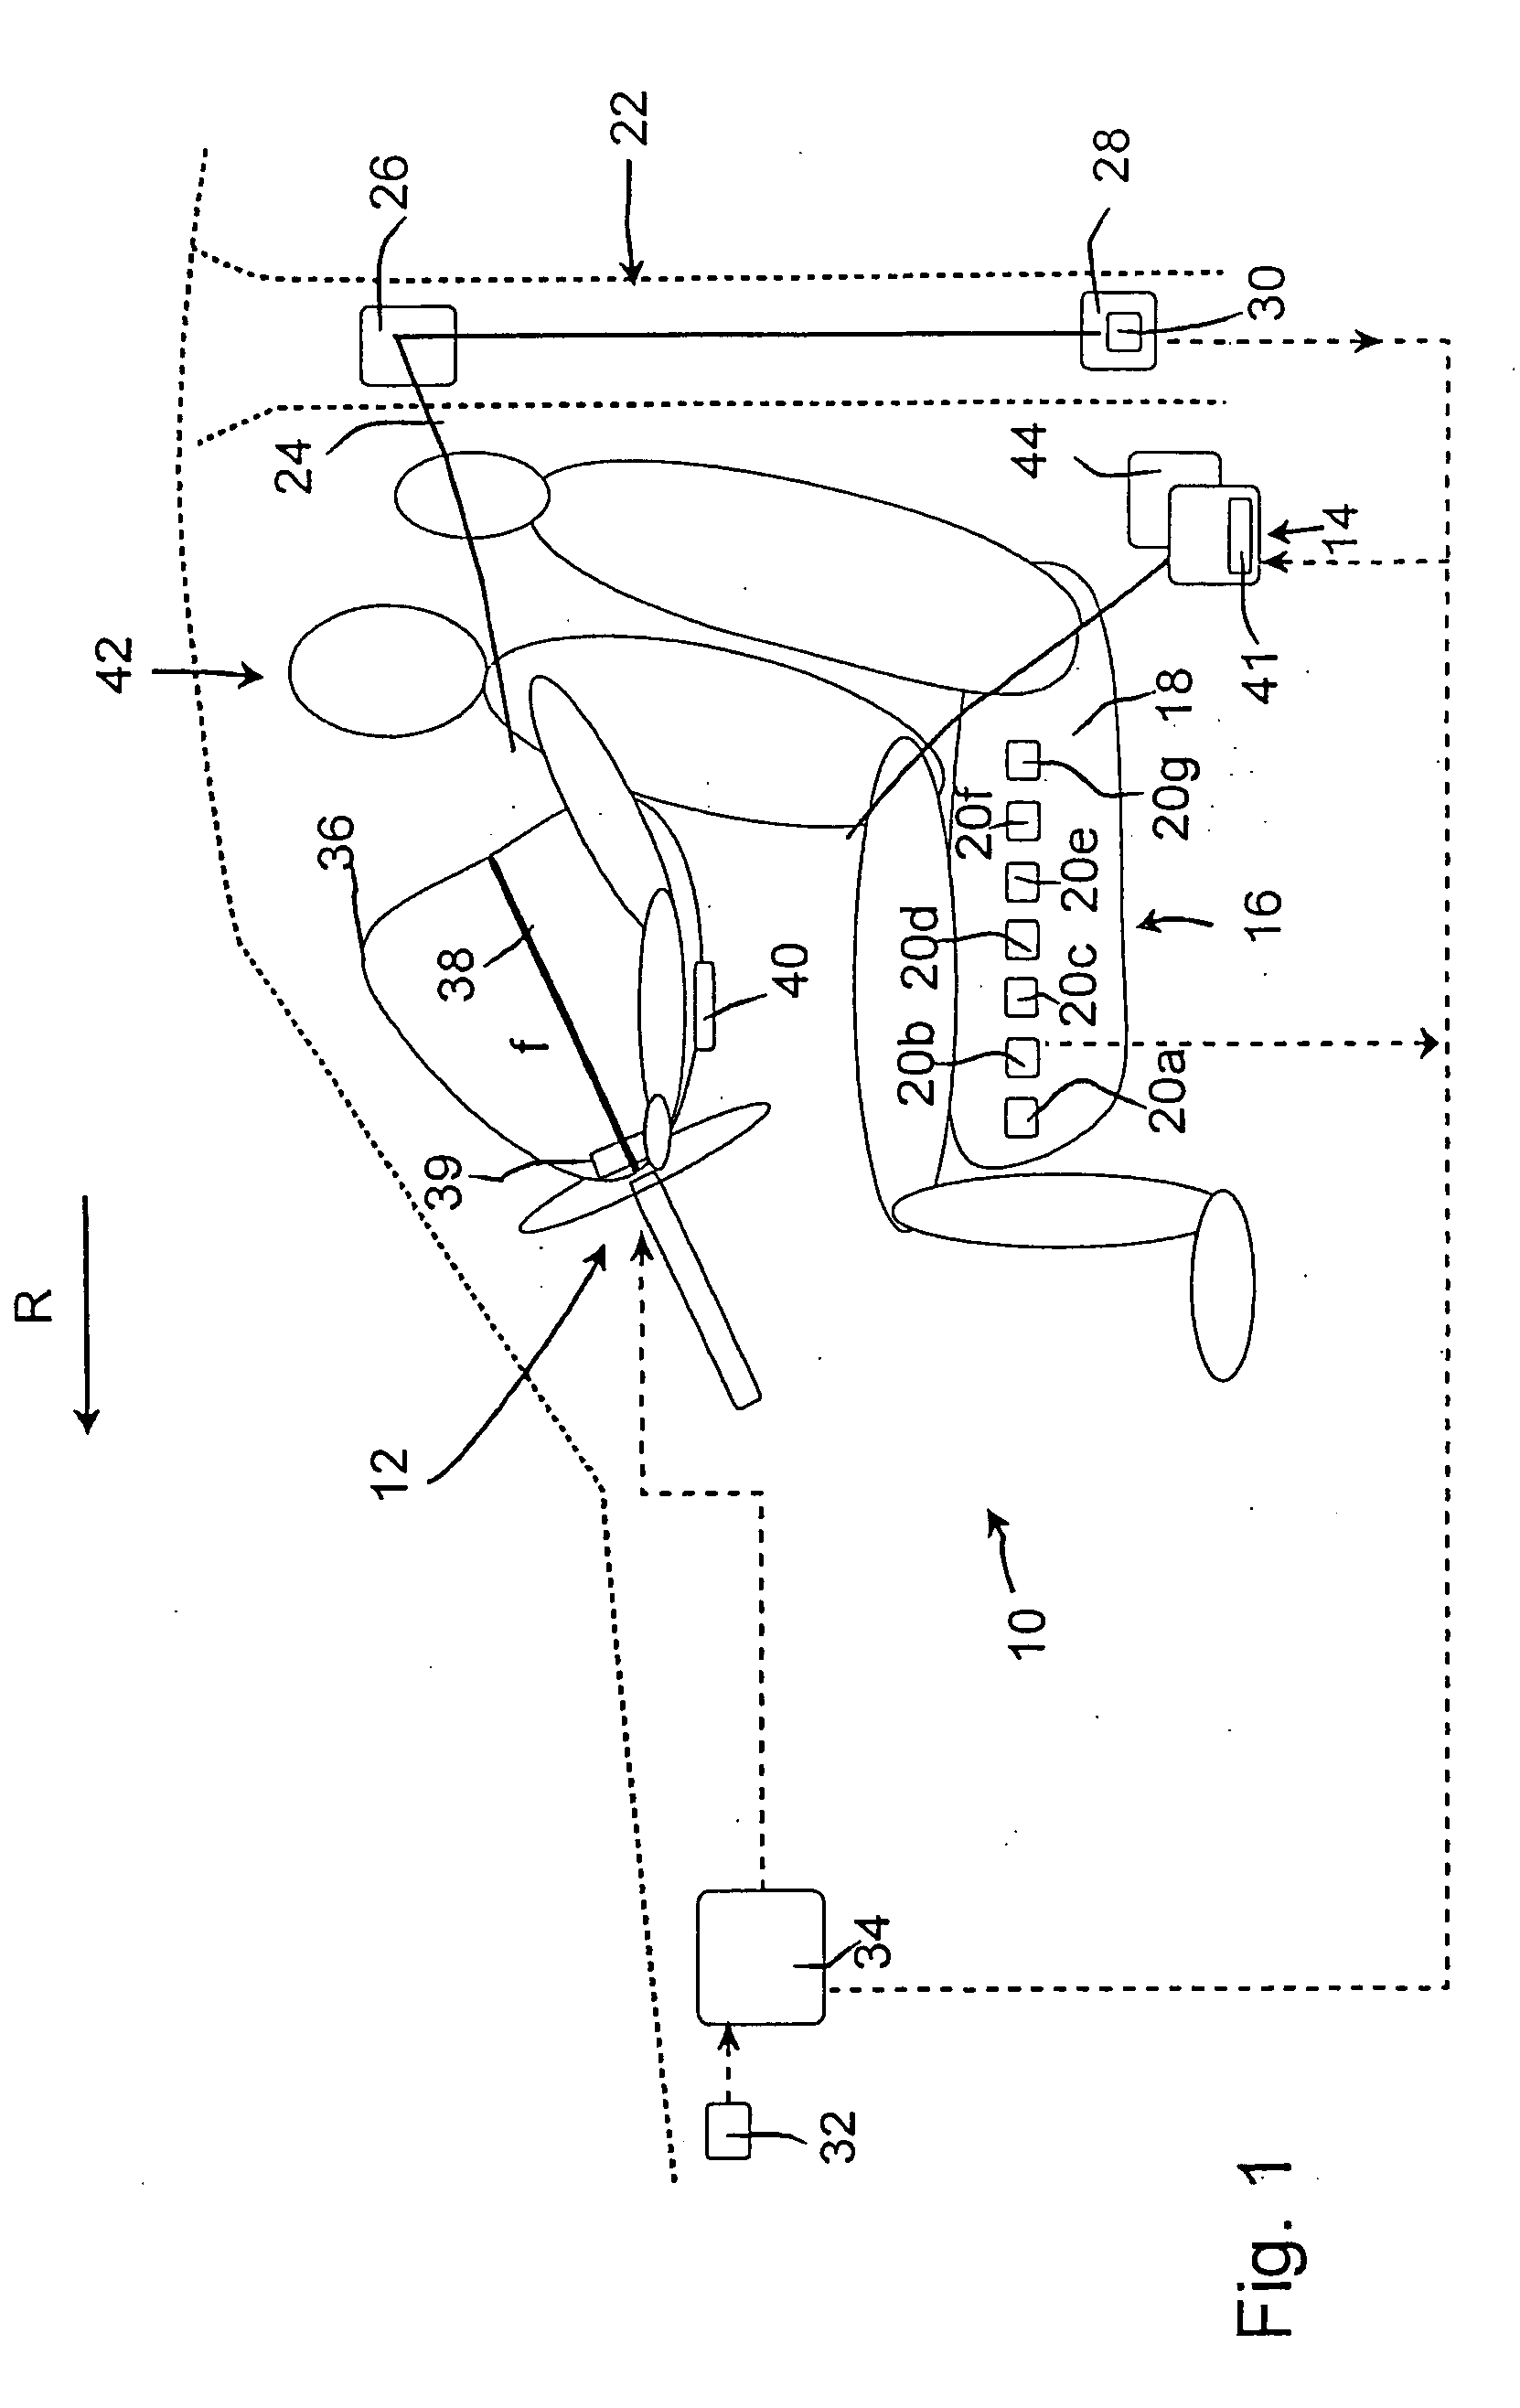 Vehicle occupant safety system and method for detecting the position of a vehicle occupant